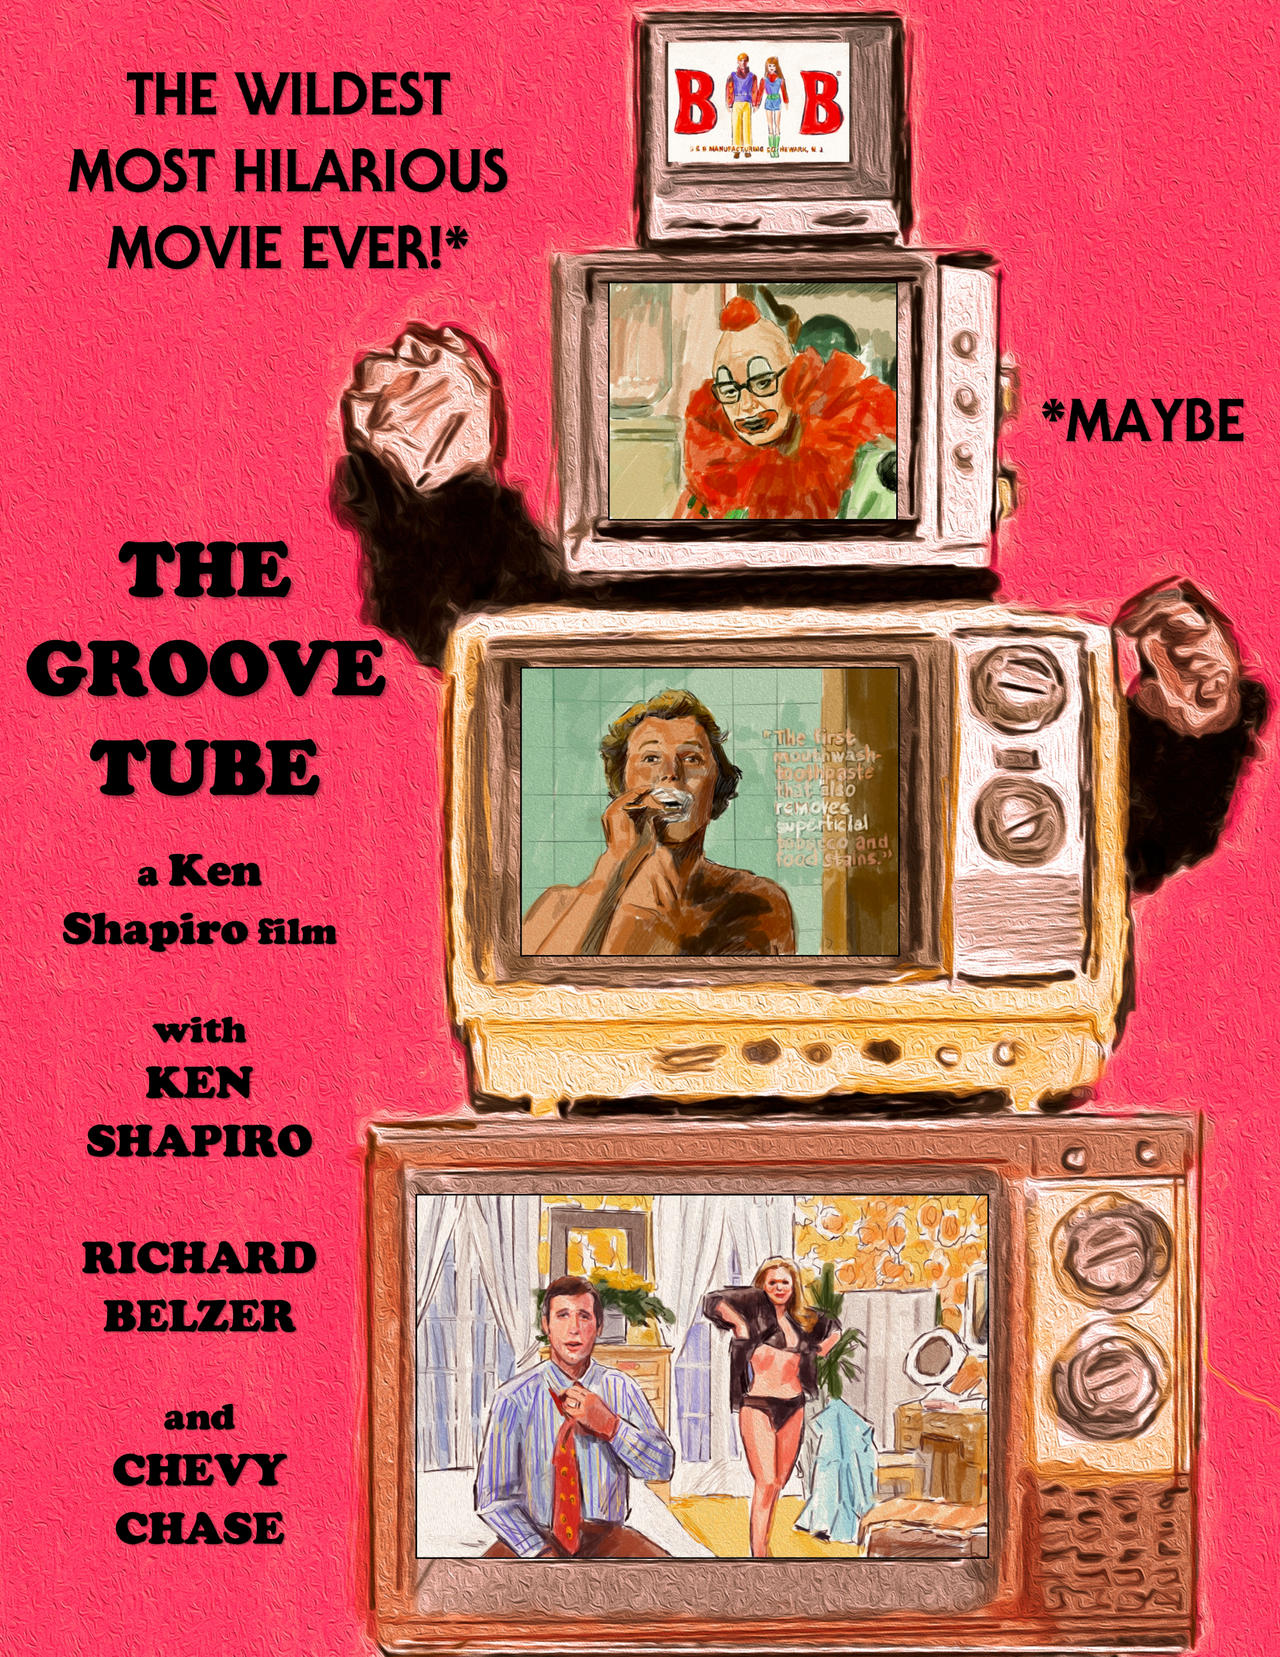 The Groove Tube (1974) by AdrockHoward on DeviantArt